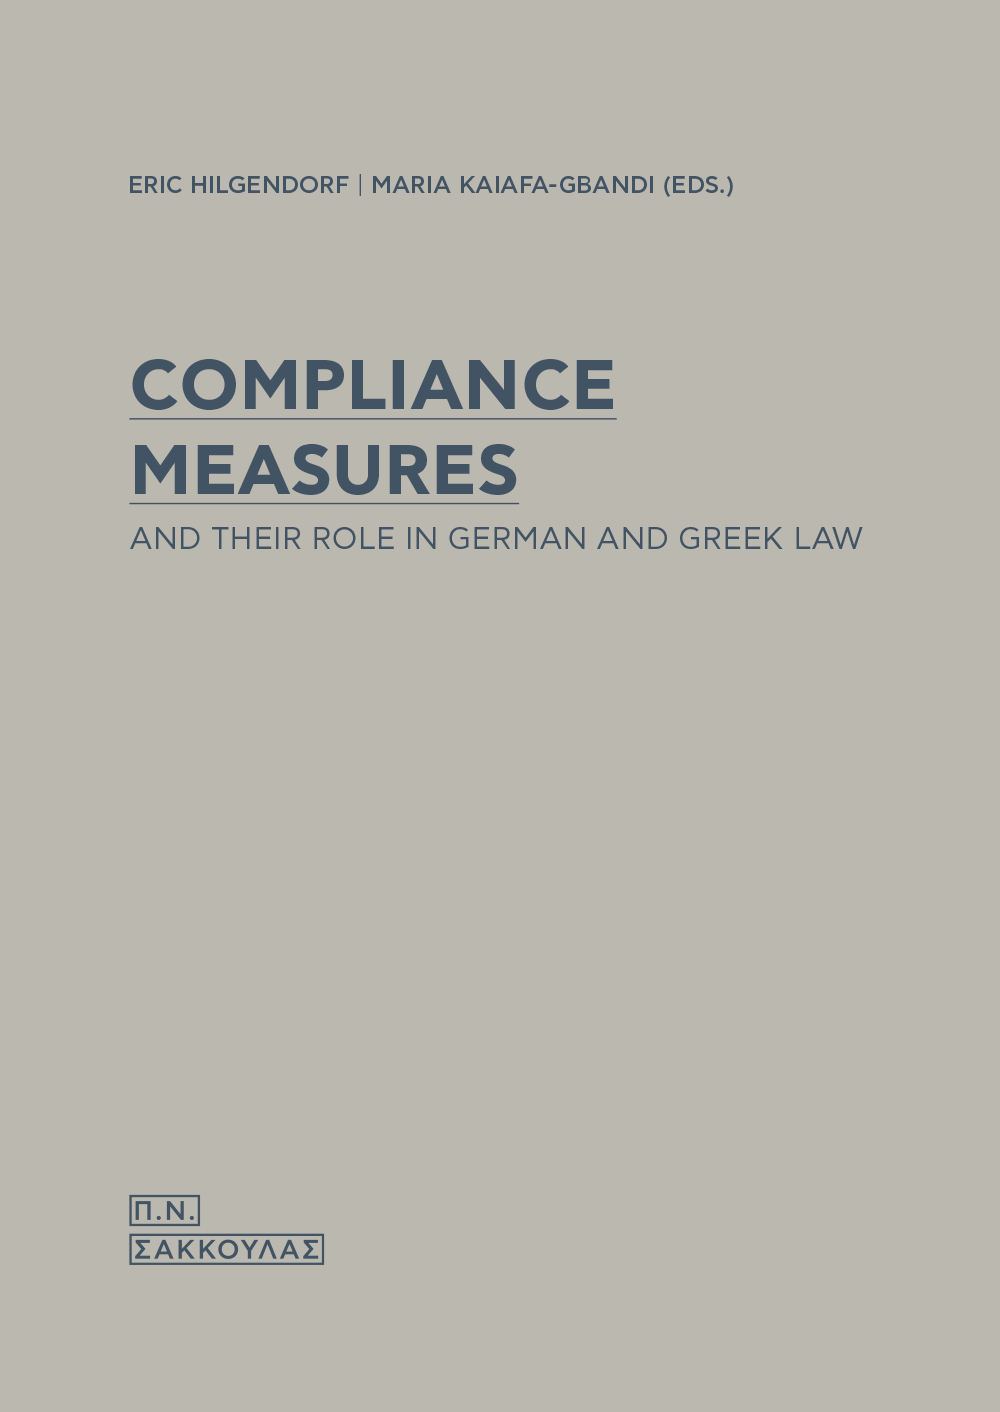 COMPLIANCE MEASURES AND THEIR ROLE IN GERMAN AND GREEK LAW